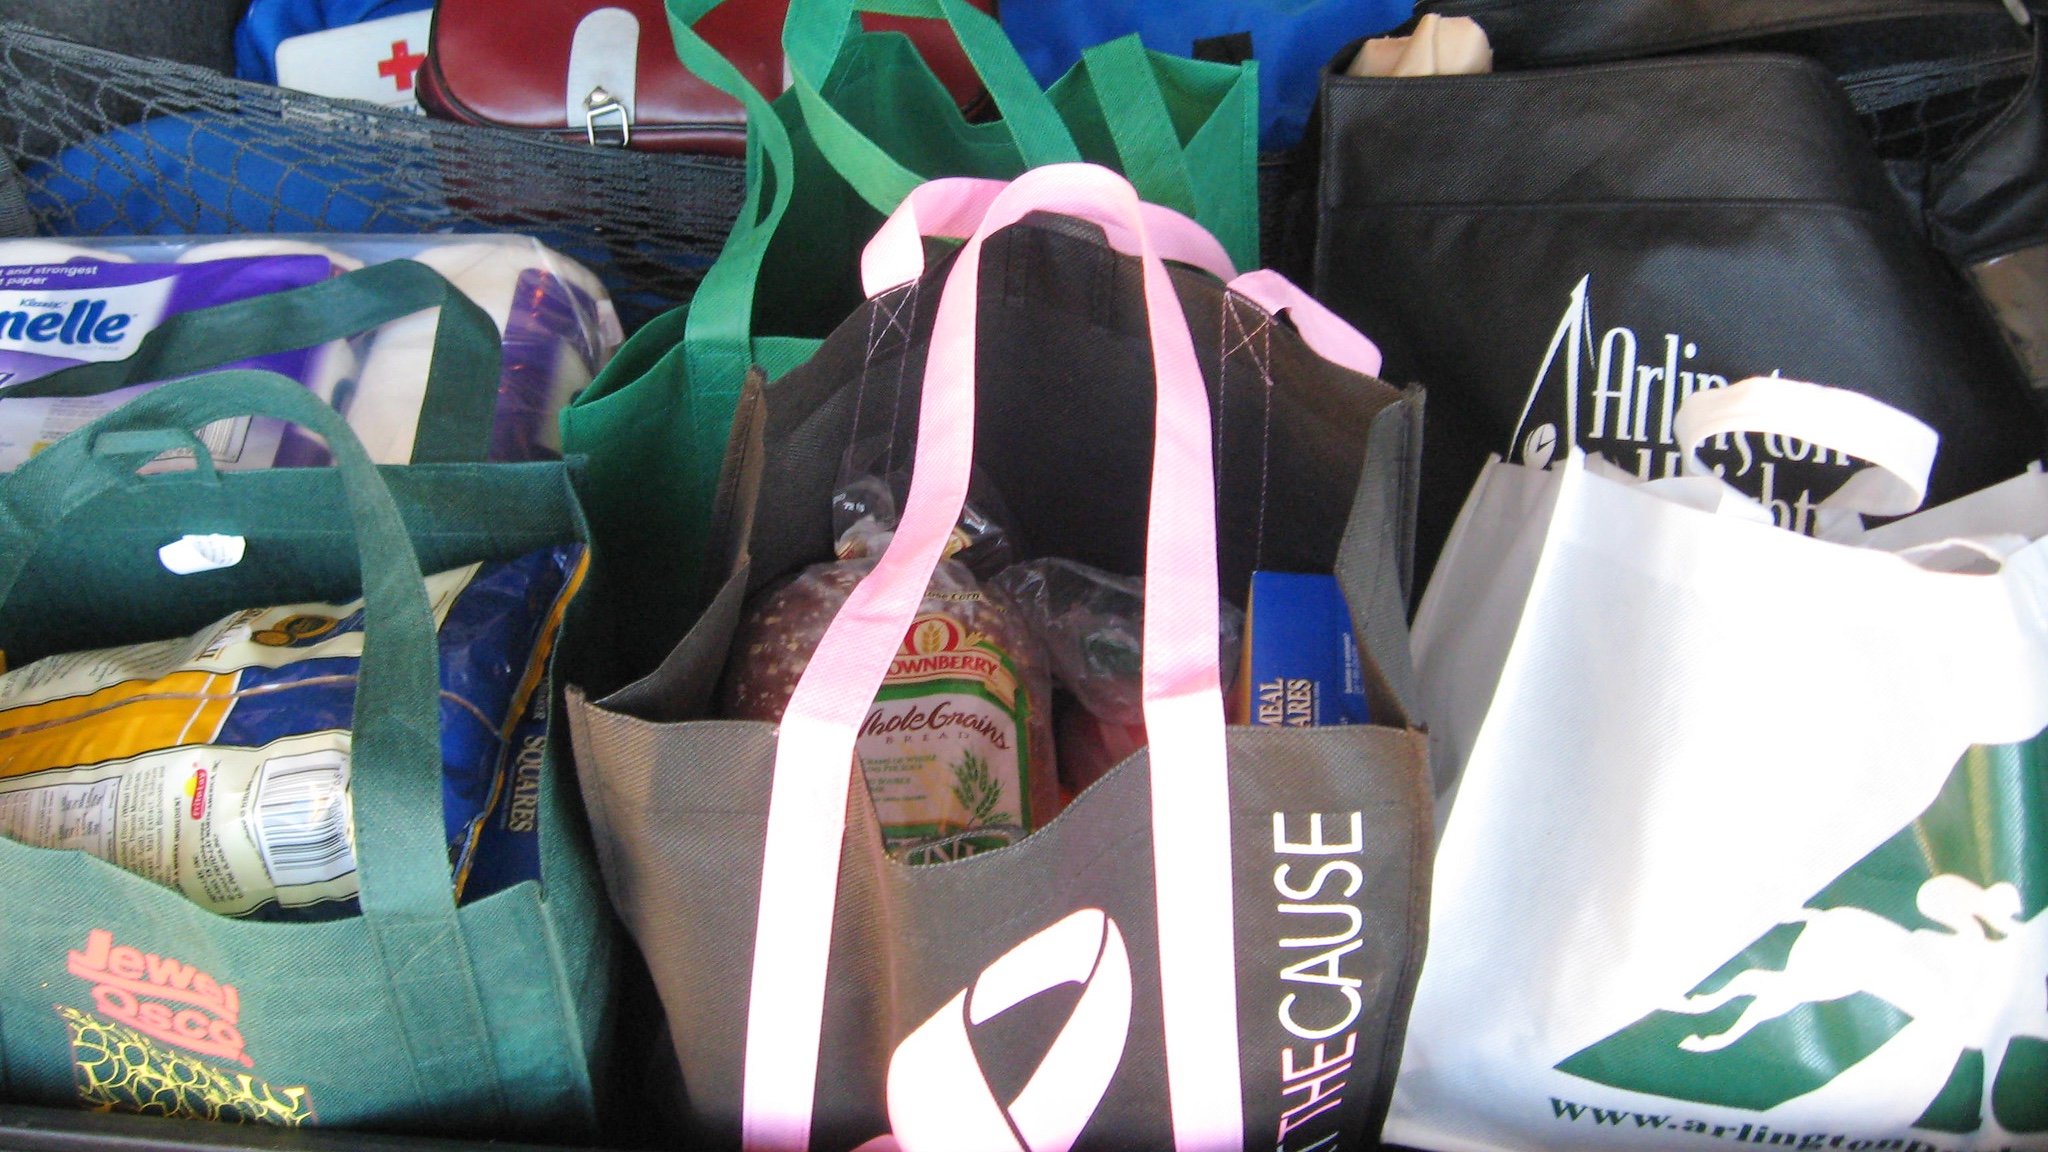 How Many Times Should You Reuse Your Reusable Shopping Bags?